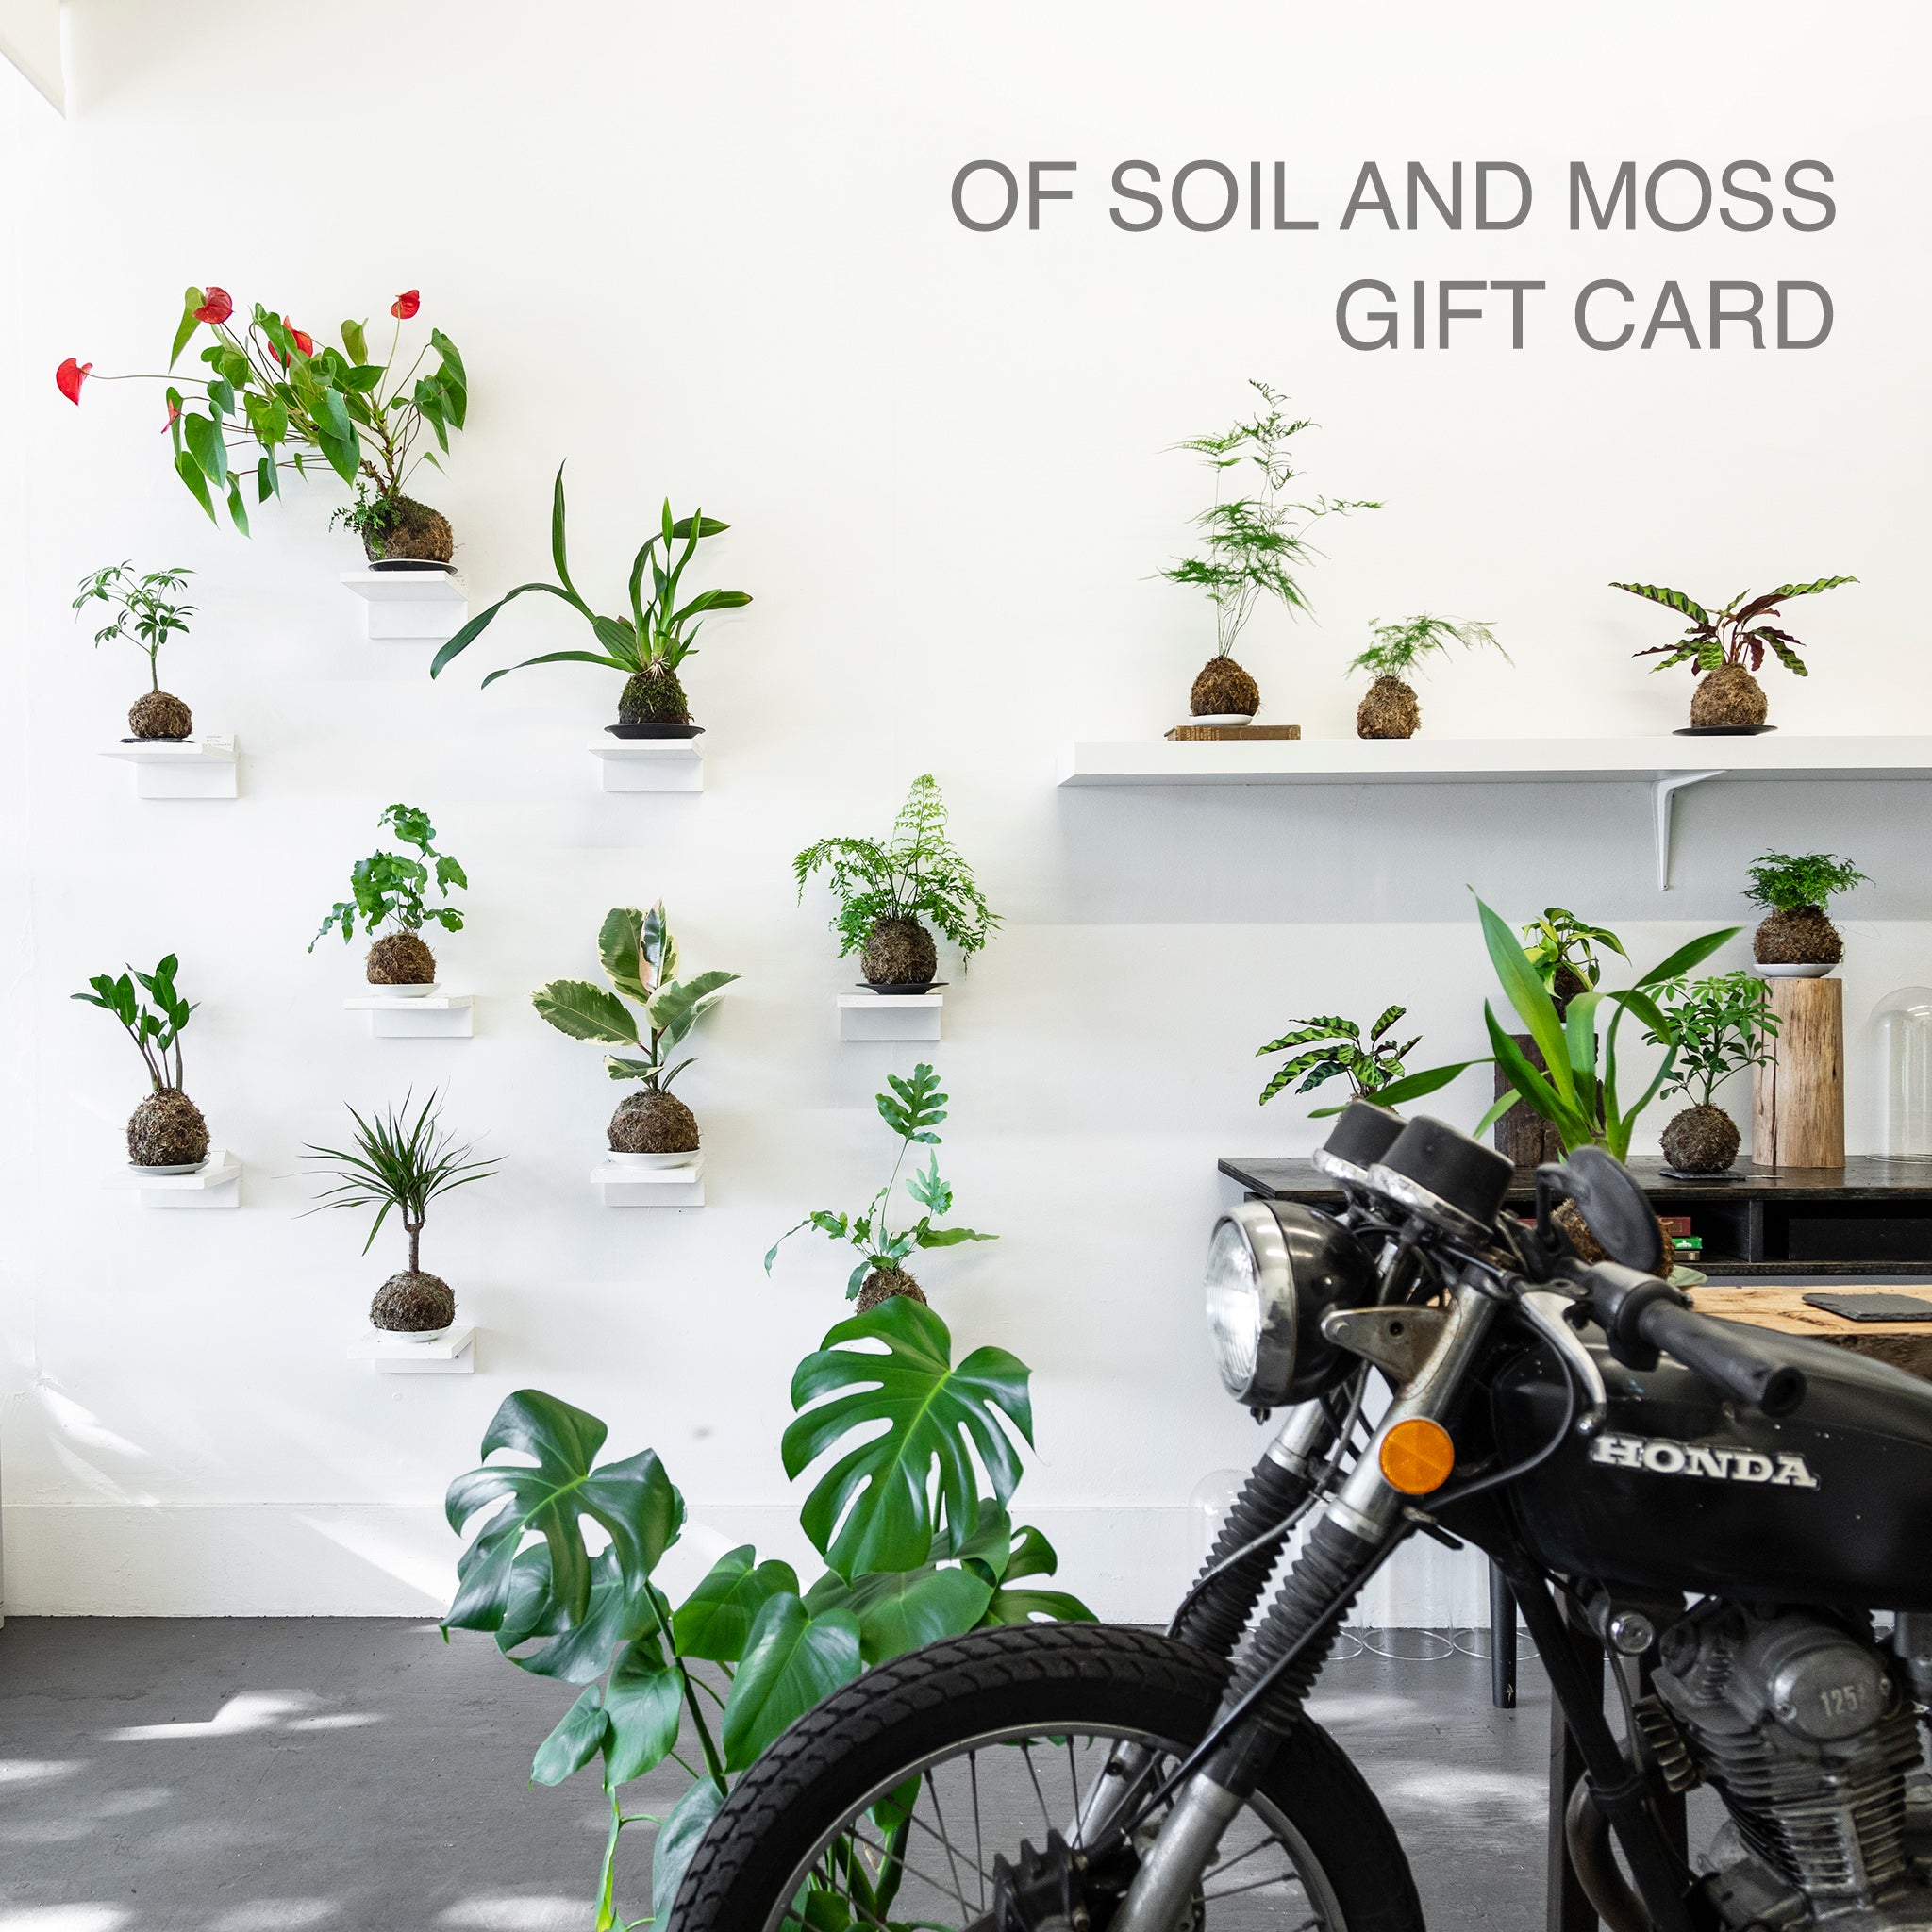 OF SOIL AND MOSS Gift Card